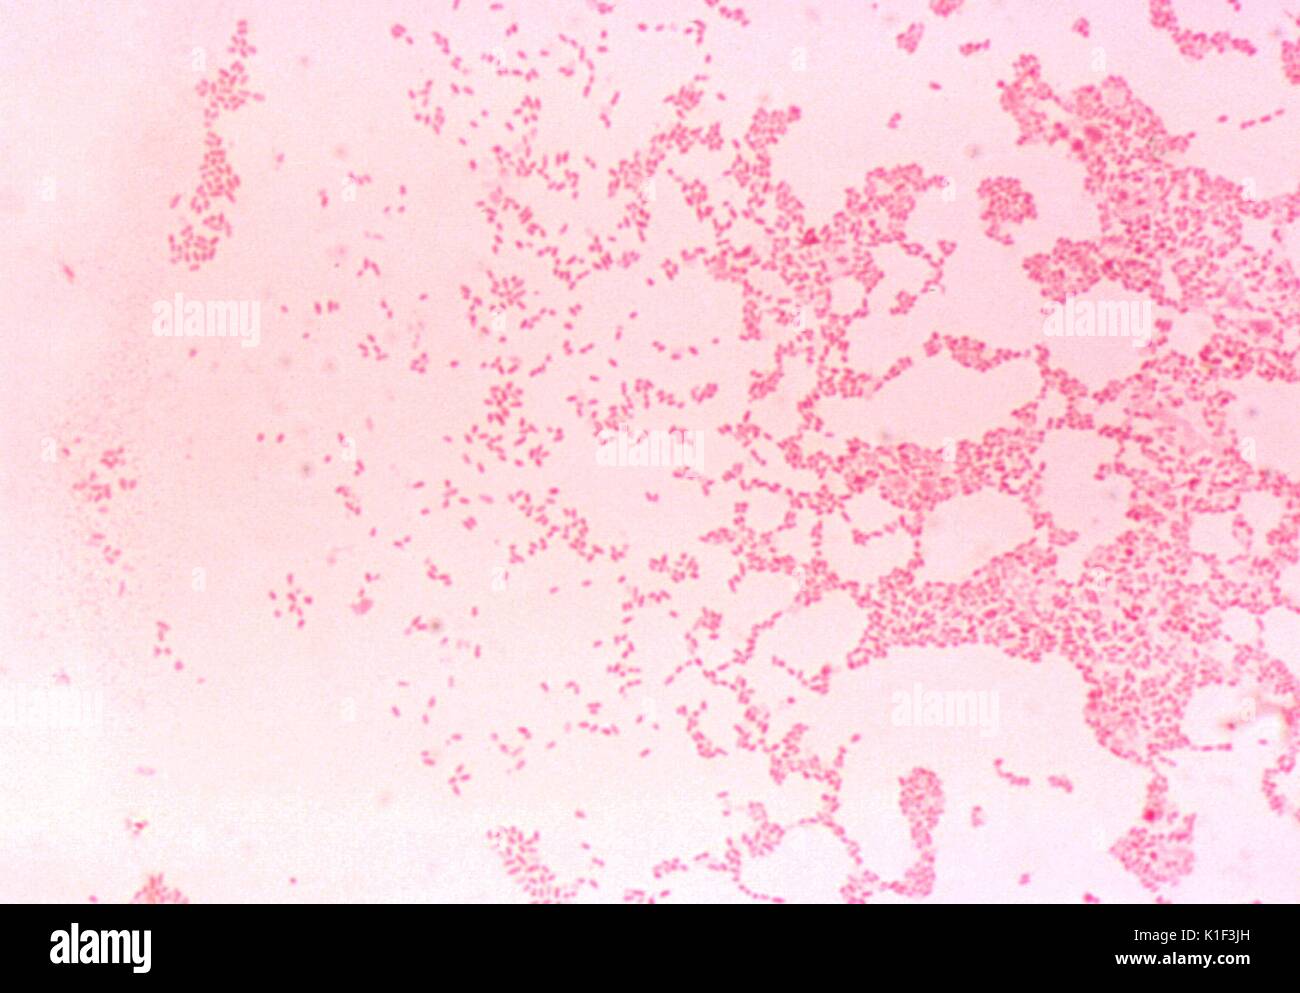 Brucella melitensis Gram-stain. Brucella melitensis is a Gram-negative staining coccobacillus, and is the cause of the zoonotic disease, Brucellosis, an illness found in animals, but able to be transmitted to humans. Image courtesy CDC/Dr. W.A. Clark, 1977. Stock Photo